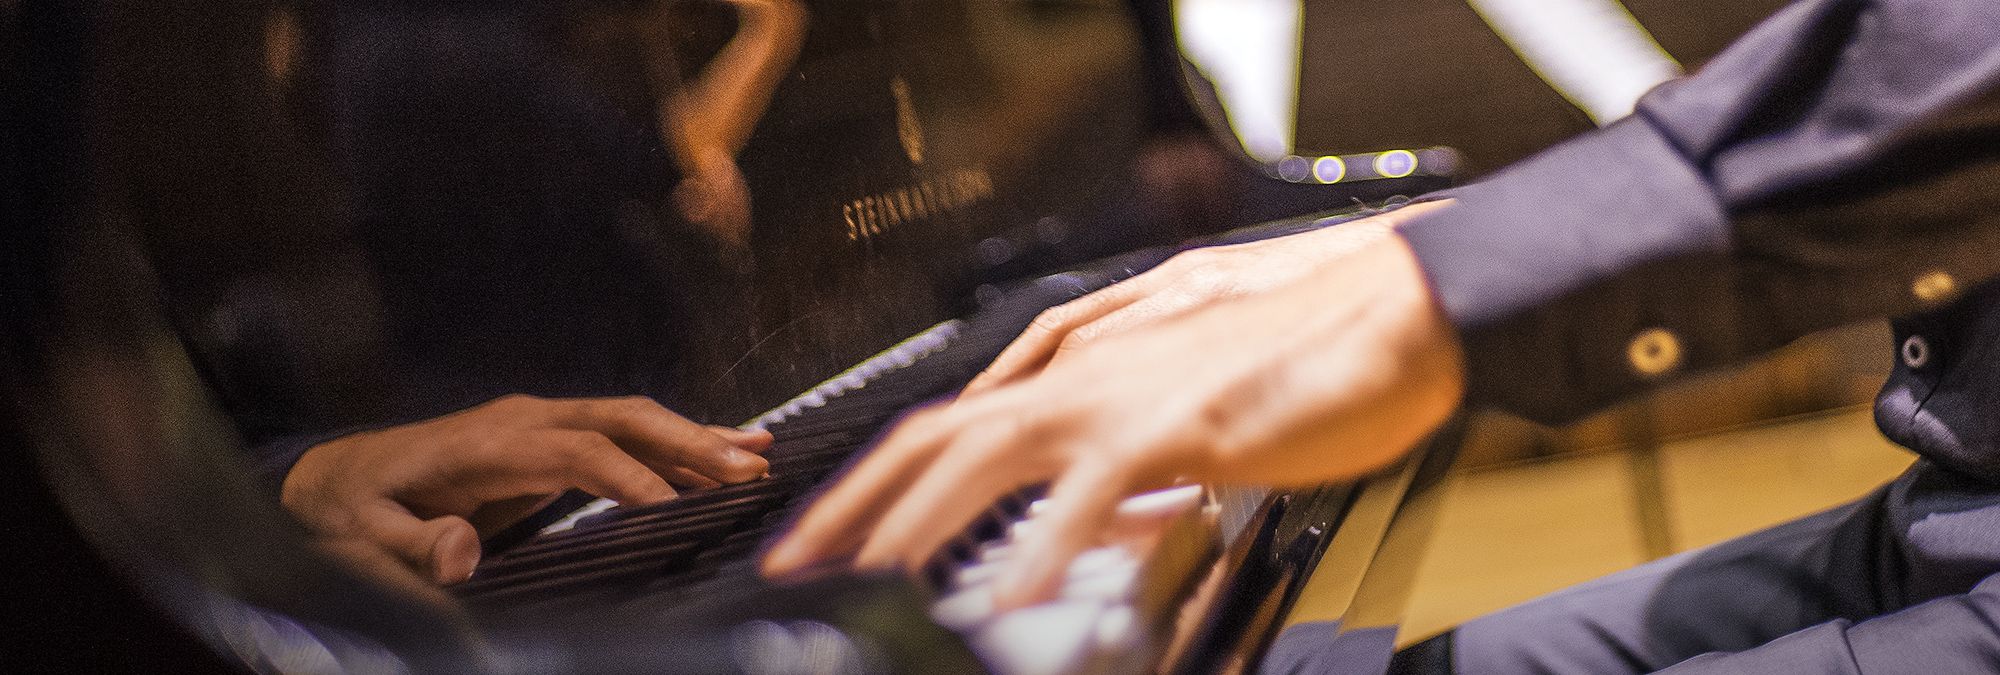  close picture of hands on the keys of a Steinway Piano